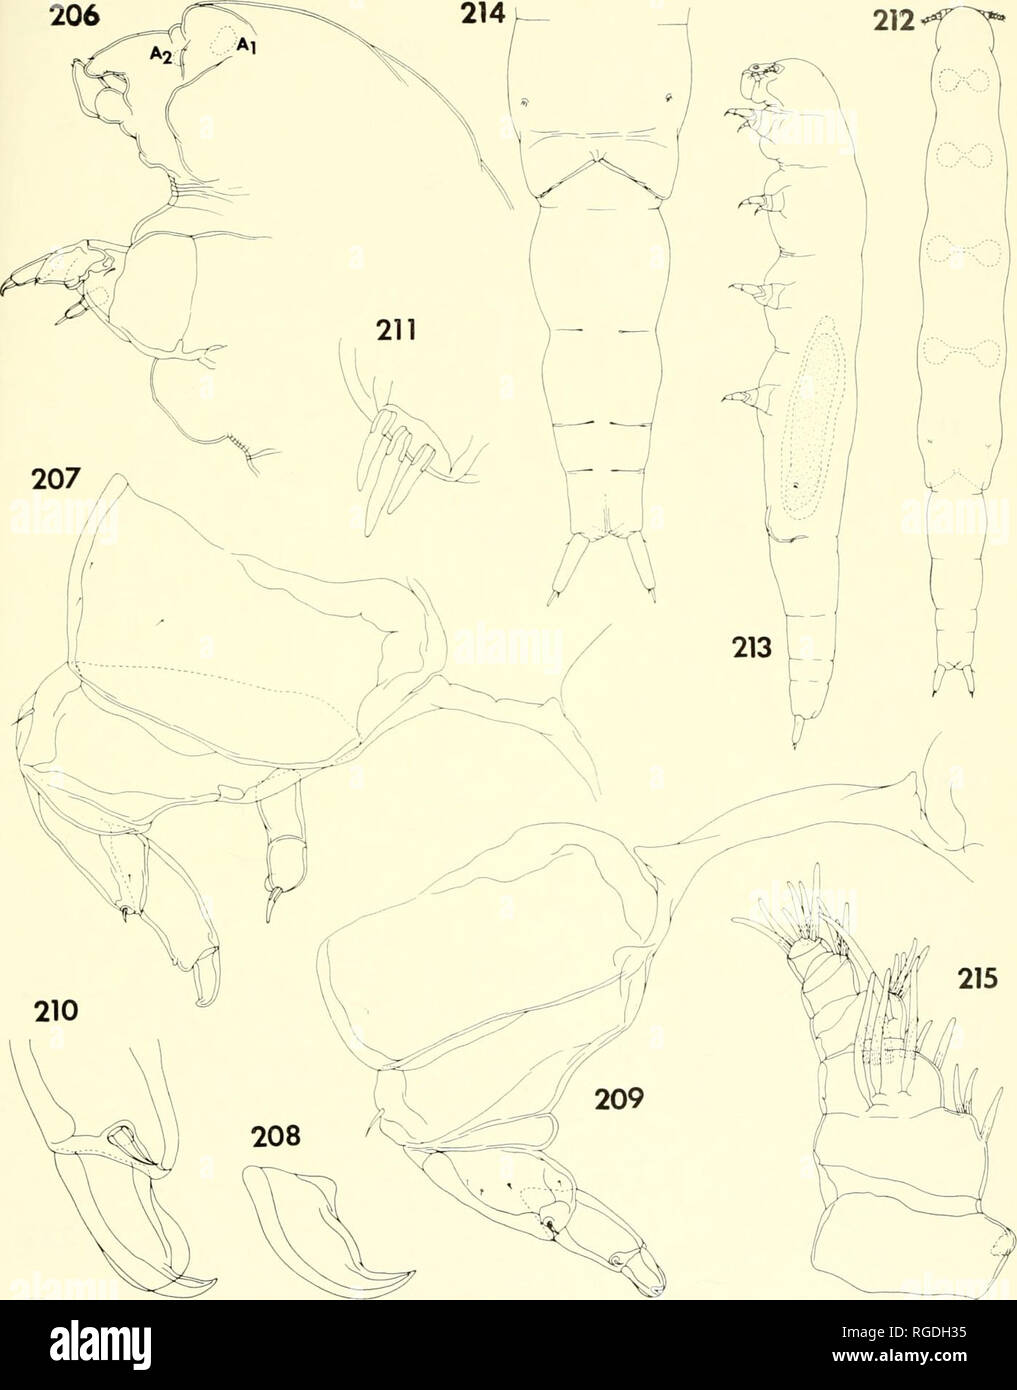 . Bulletin of the Museum of Comparative Zoology at Harvard College. Zoology. Parasitic Copepods from Corals in Madagascar • Humes and Ho 457. Figures 206-211. Orstomeila laviae n. gen., n. sp., female (continued). 206, anterior part of body, lateral (H); 207, leg 1 and intercoxal plate, posterior (C); 208, terminal spine on exopod of leg 1, outer (E); 209, leg 3 and intercoxal plate, posterior (C); 210, terminal portion of exopod of leg 3, lateral (E); 211, leg 5, ventral (E). Figures 212-215. Orsfome//a fovioe n. gen., n. sp., male. 212, body, dorsal (J); 213, body, lateral (J); 214, urosome, Stock Photo